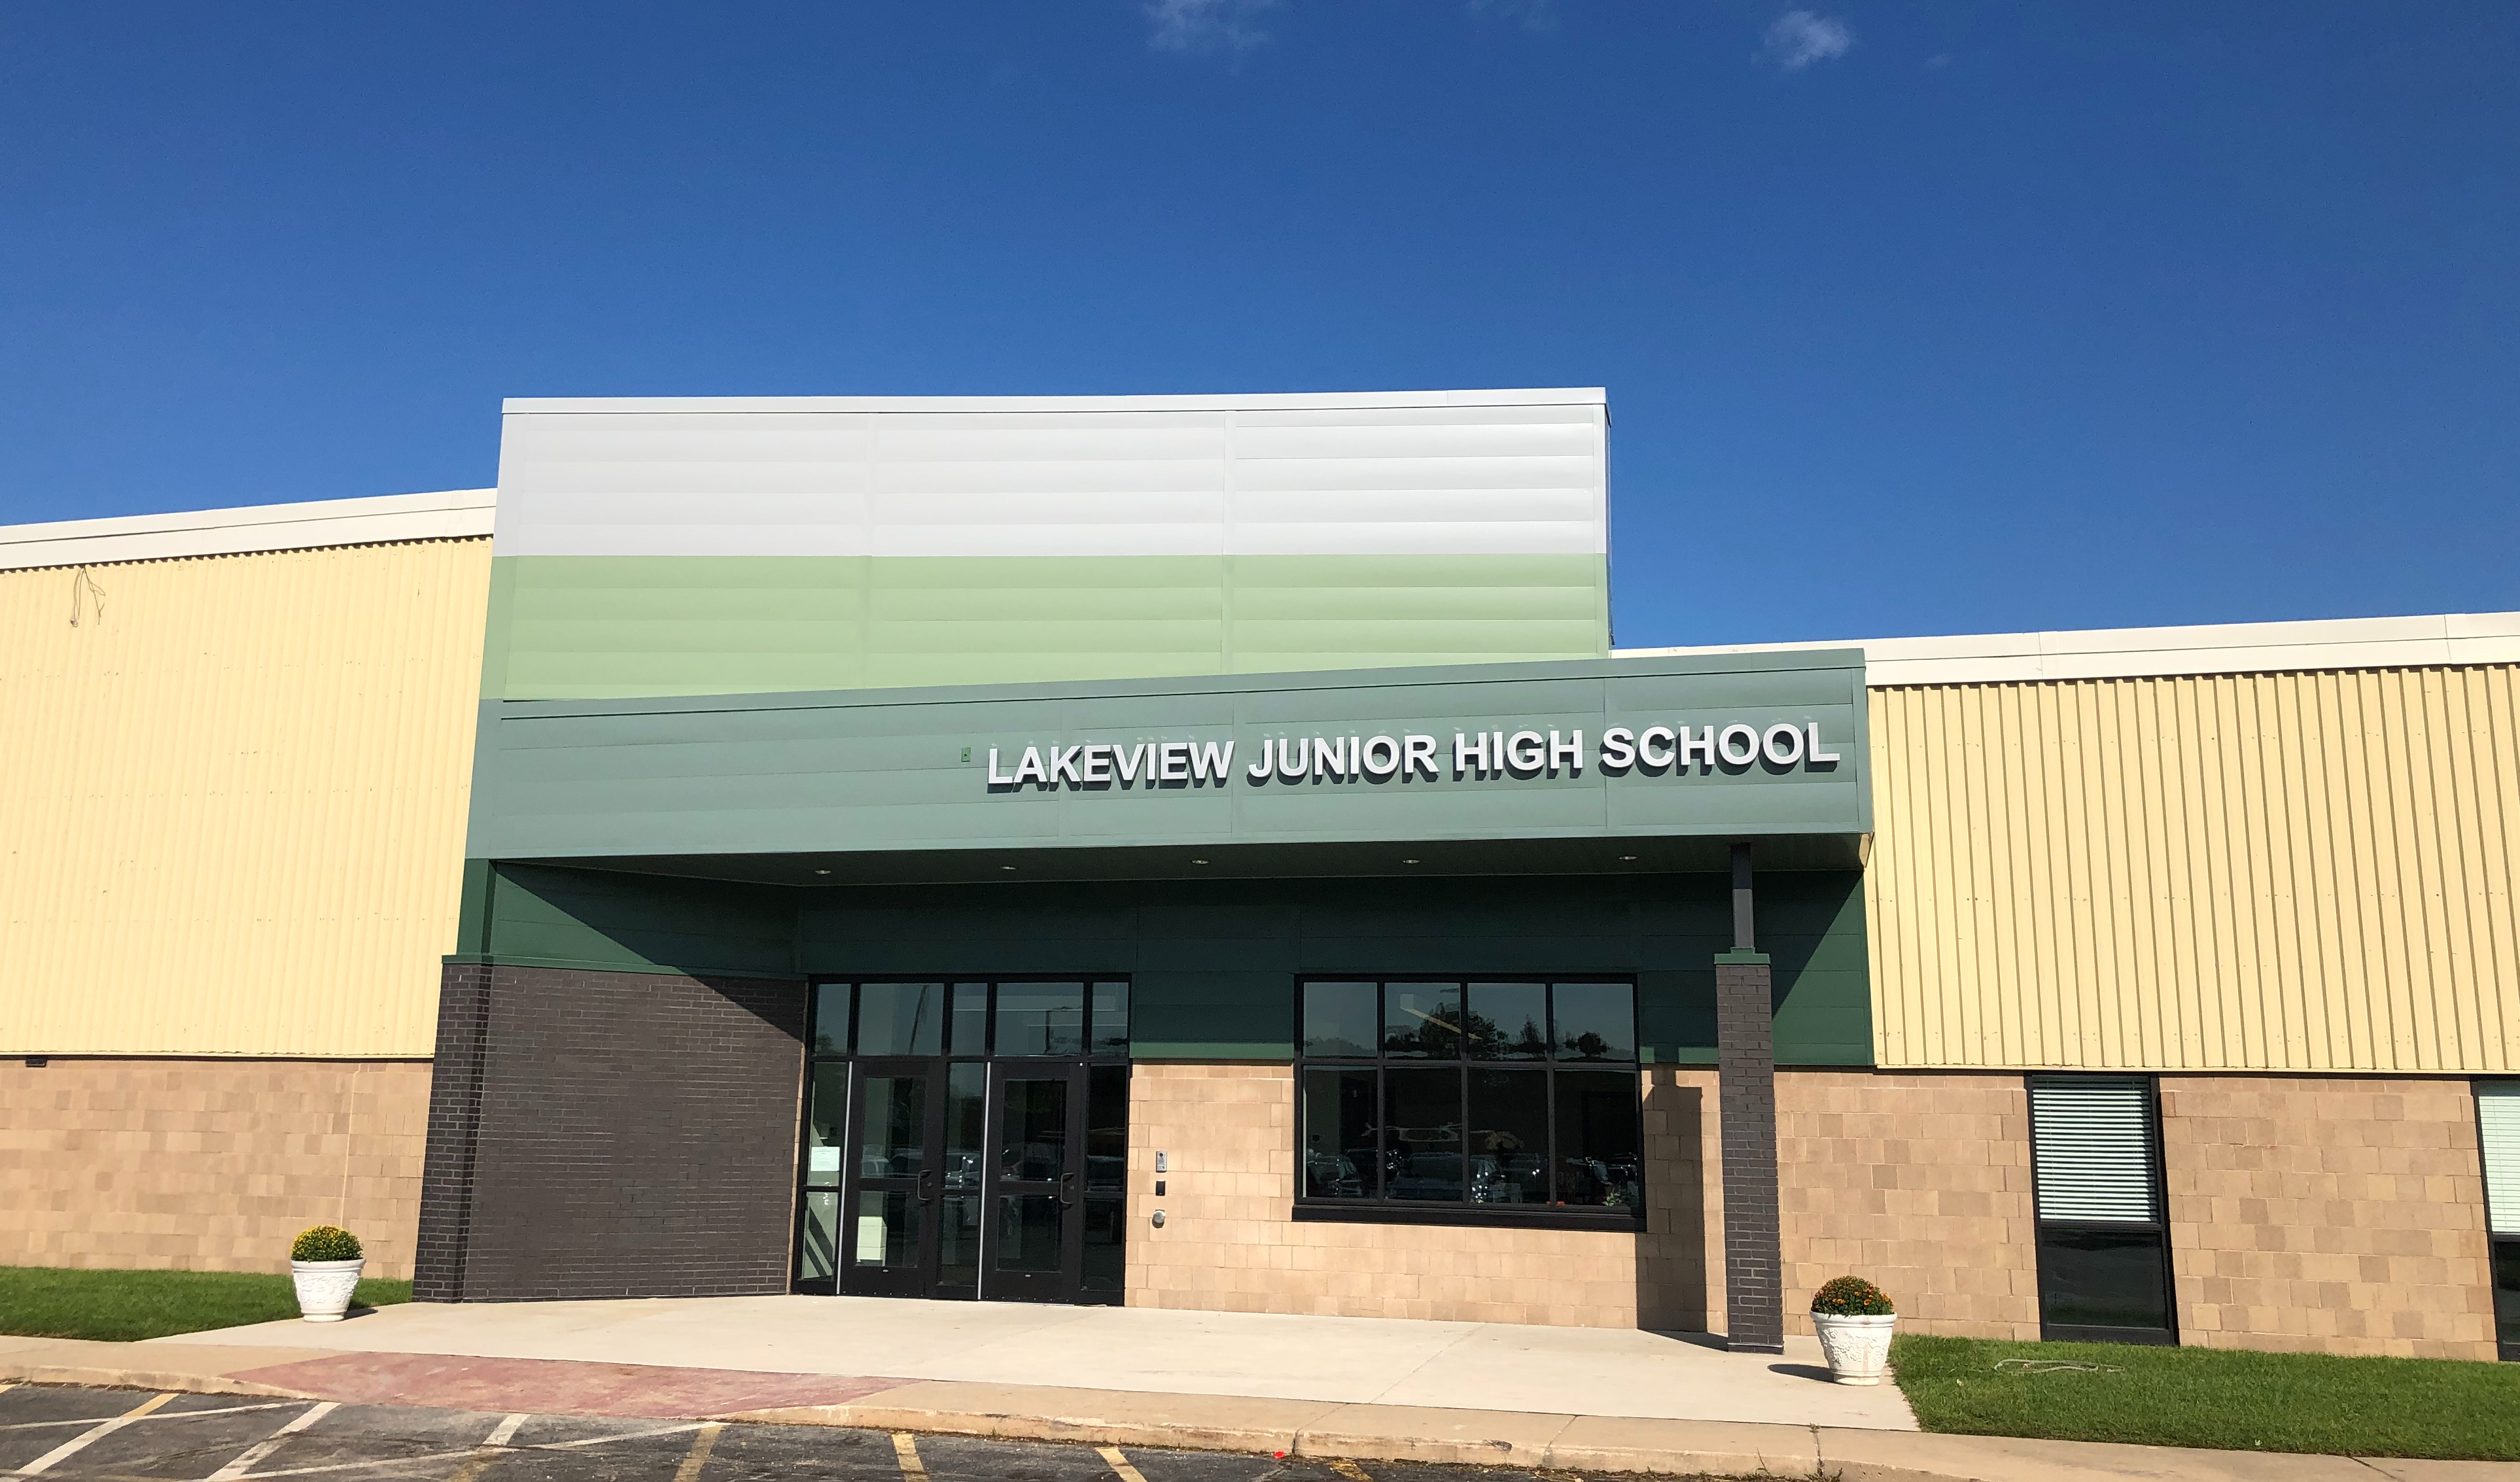 Lakeview Junior High School building